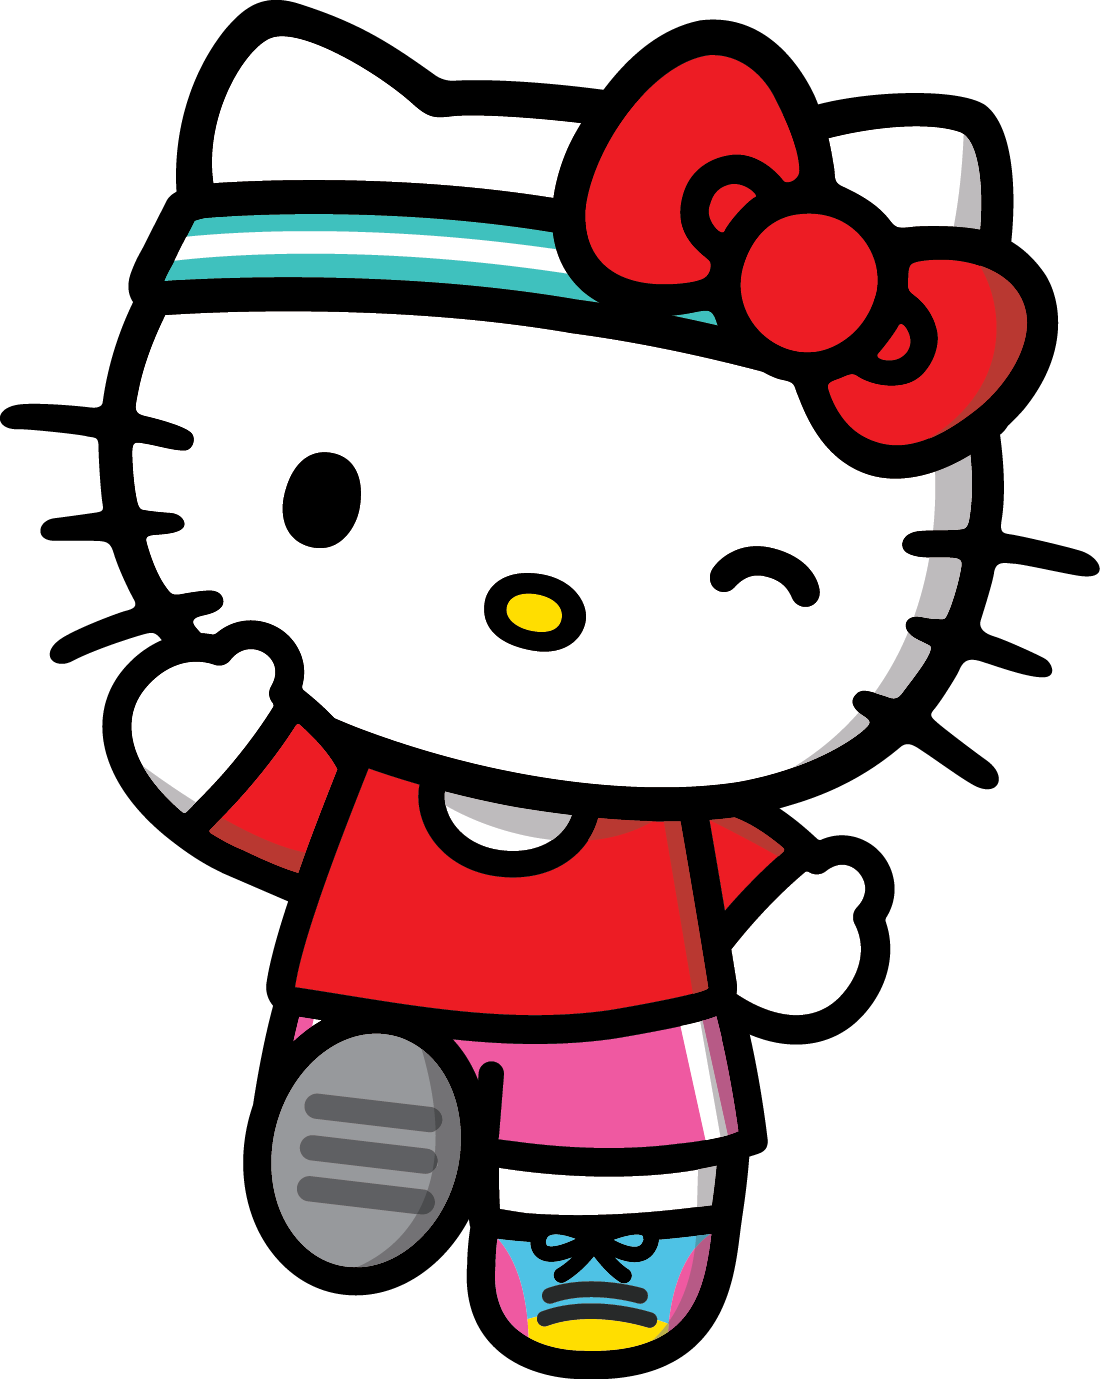 Download image result for hello kitty running logo inspiration hello kitty images sanrio hello kitty hello kitty coloring